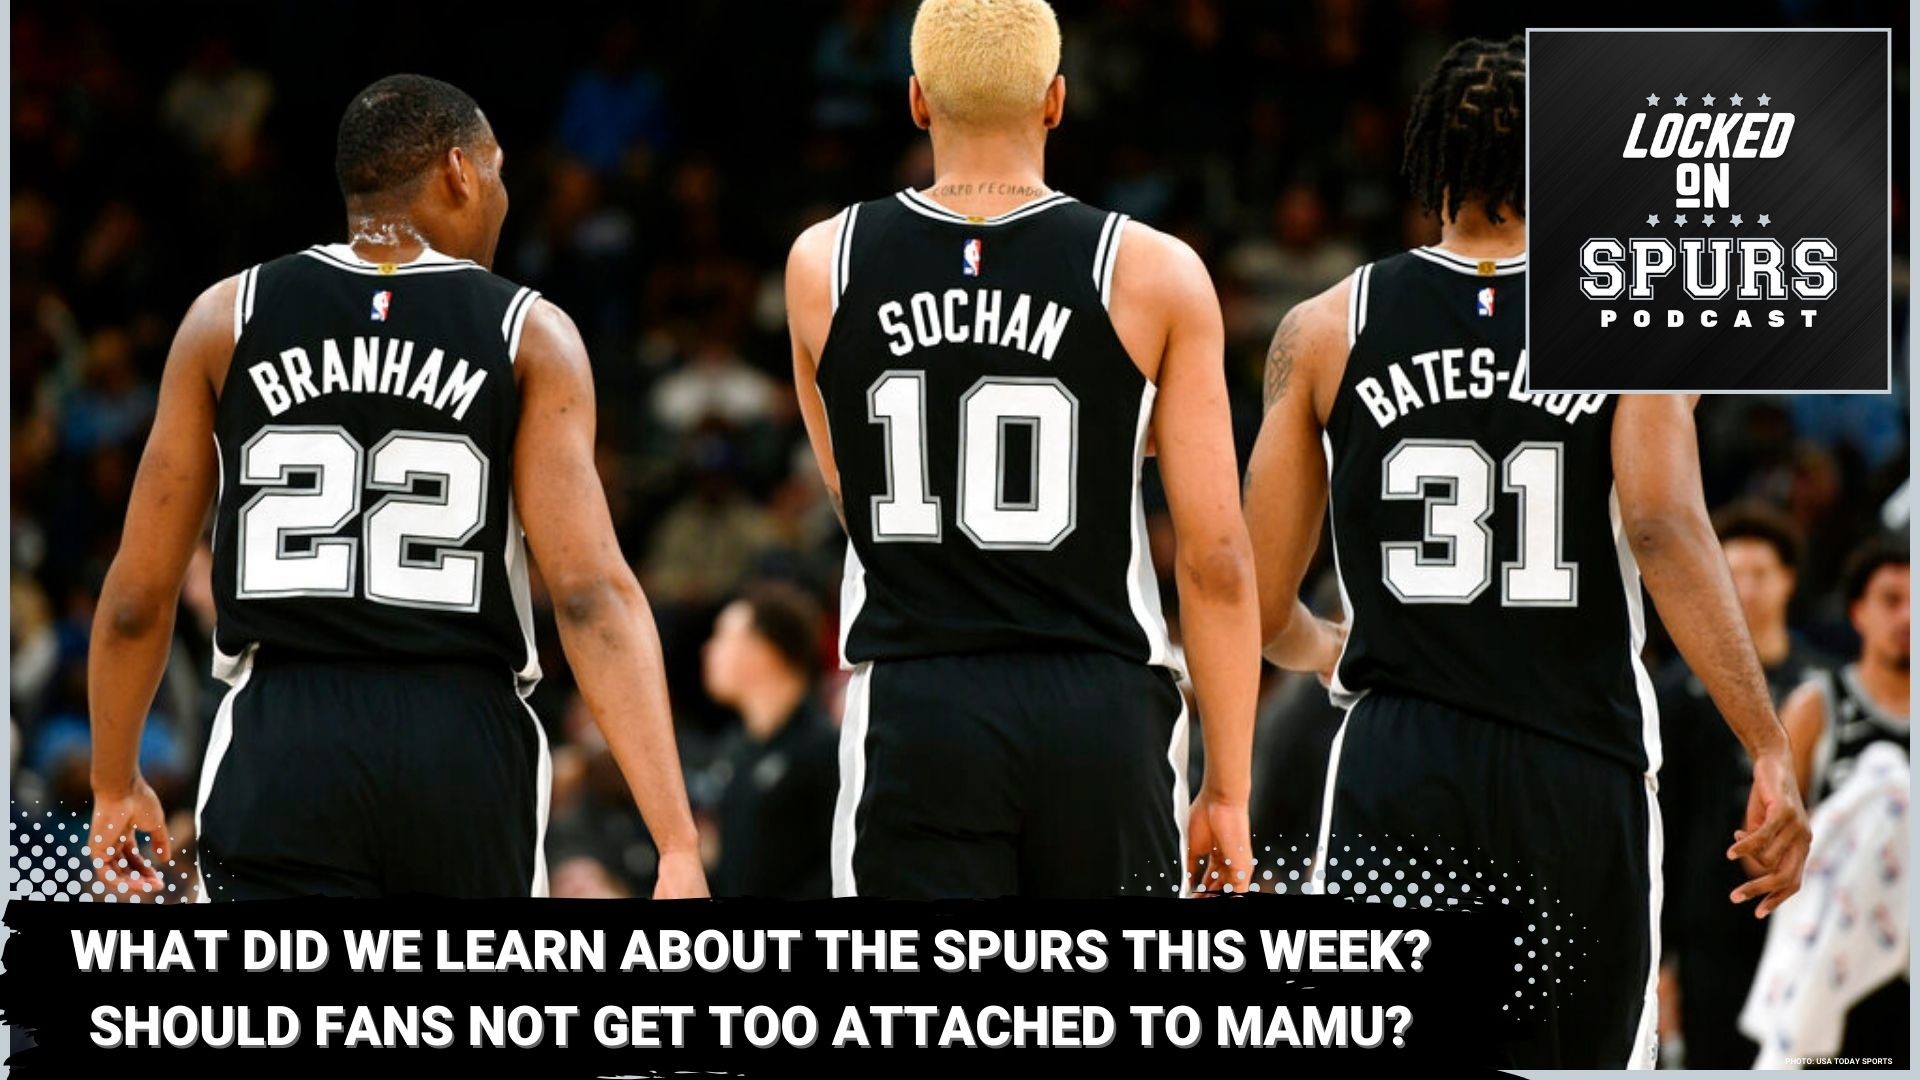 Here's what we learned about the young Spurs and some jersey talk.